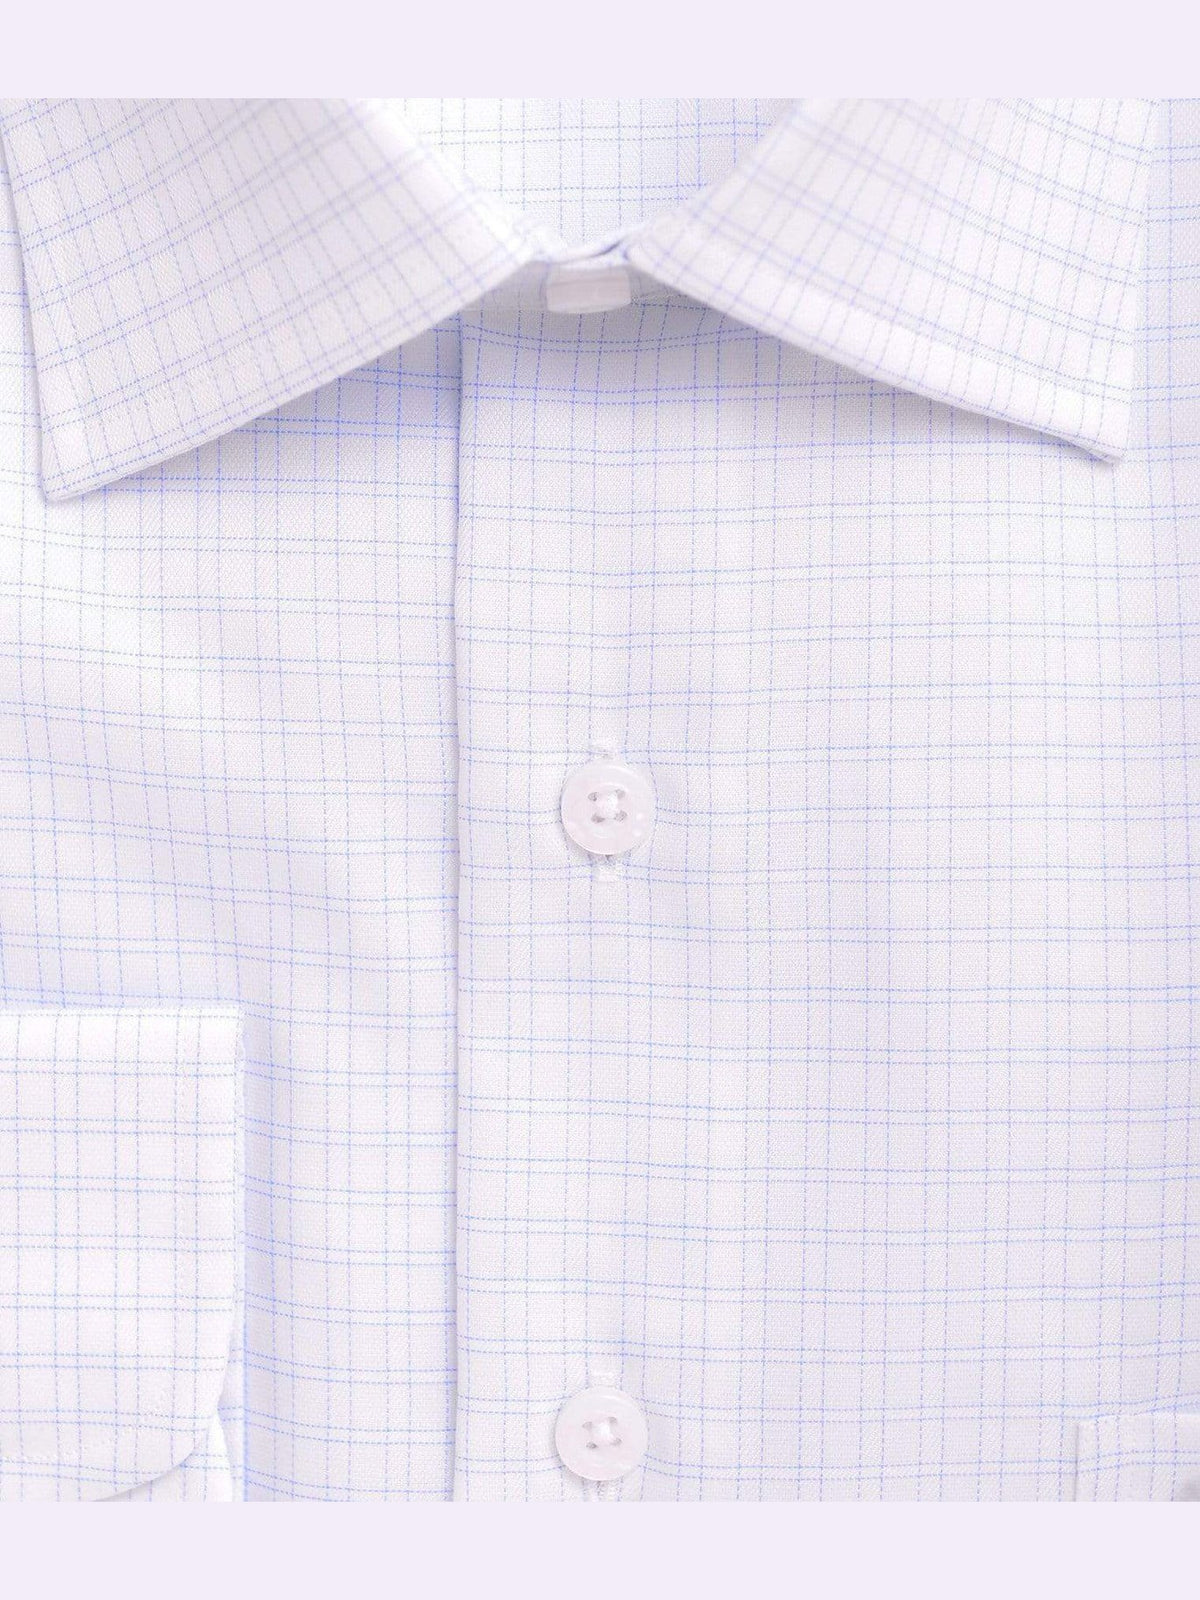 Proper Shirtings SHIRTS Mens Classic Fit White And Blue Plaid Spread Collar 100 2 Ply Cotton Dress Shirt